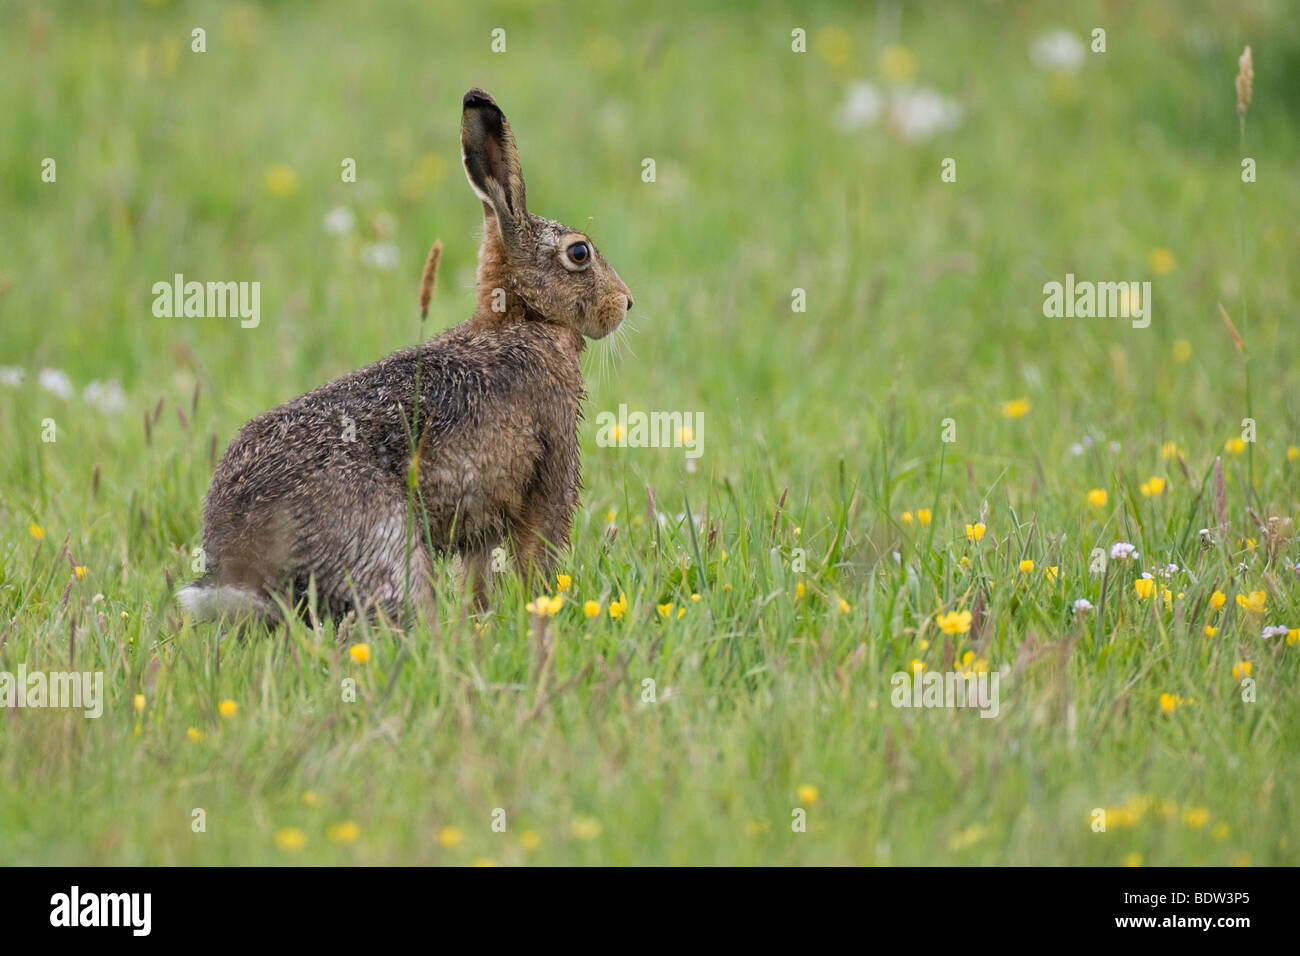 A hare sitting in the grass Stock Photo